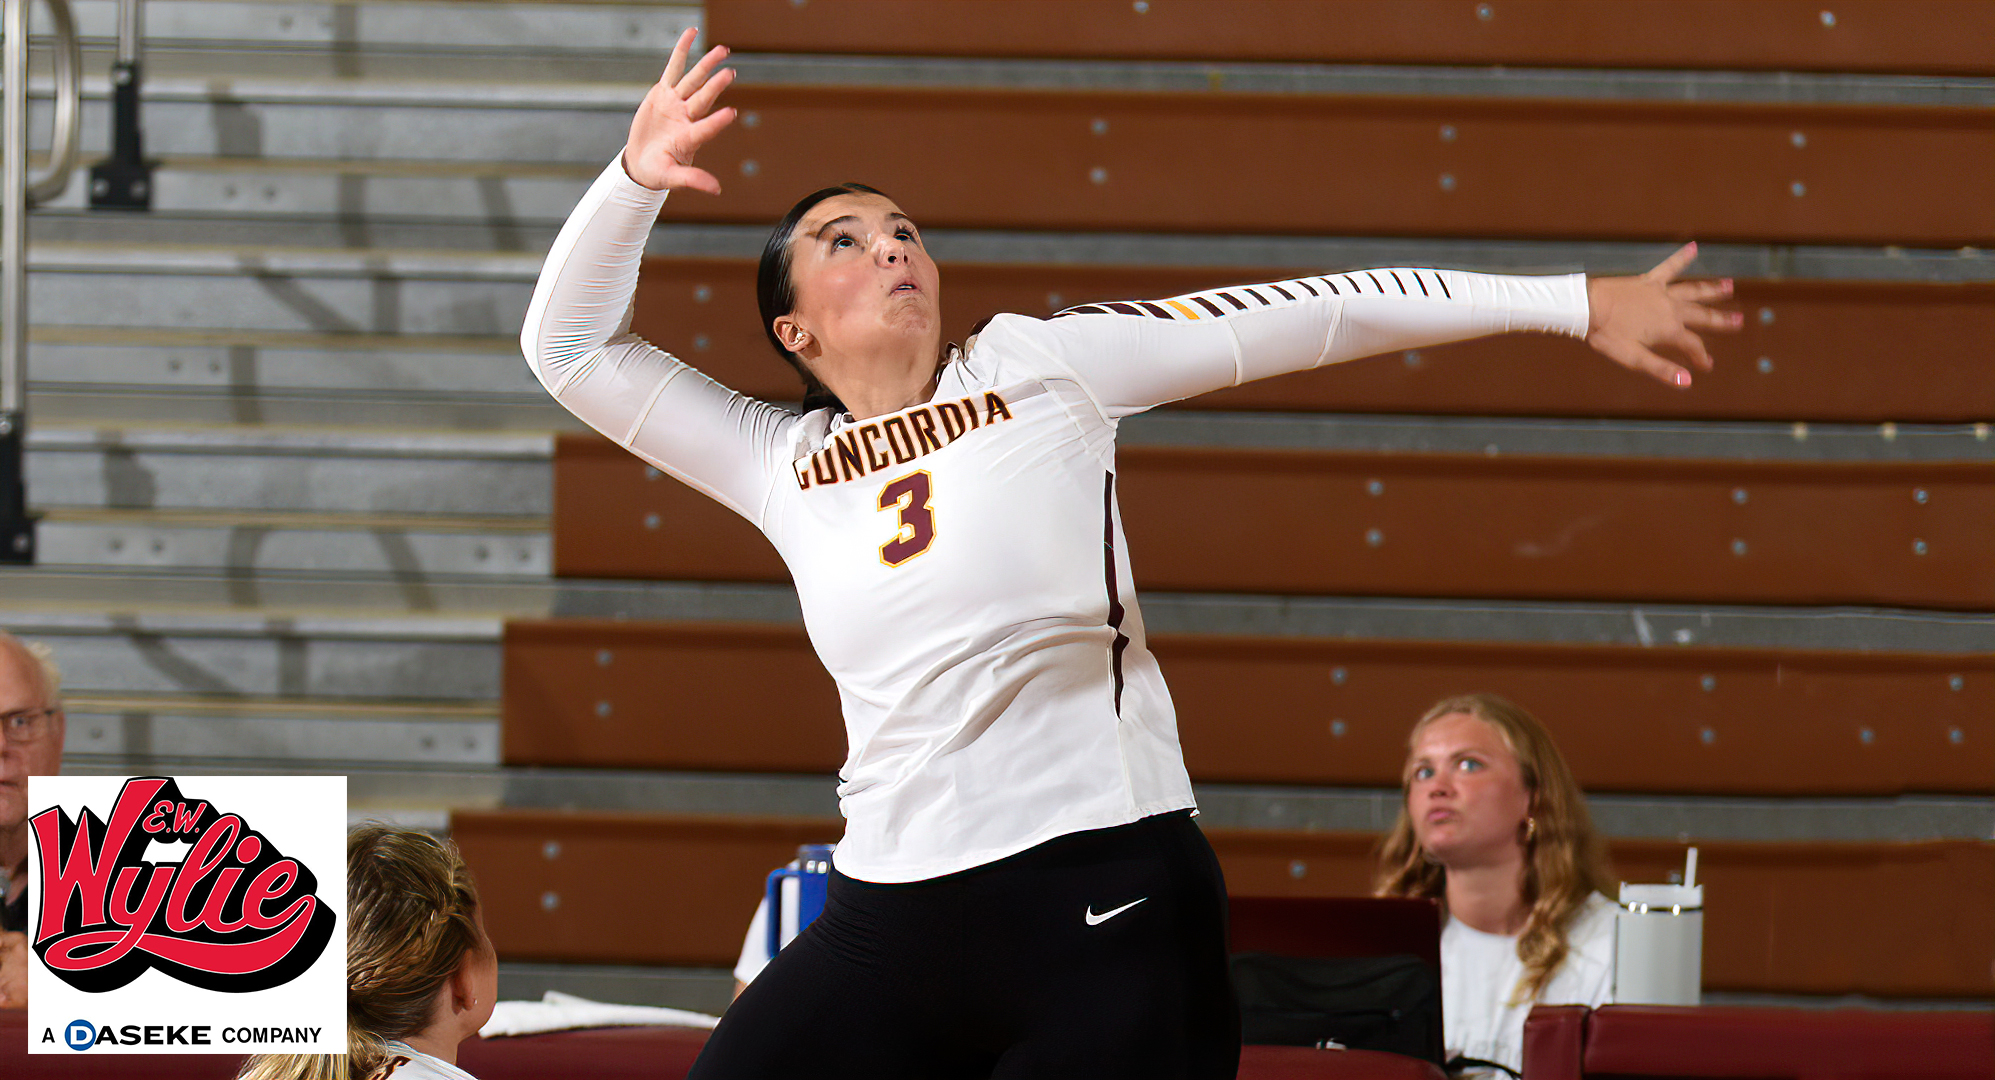 Mallory Leitner recorded a career-high 21 kills in the Cobbers' match with St. Norbert. She led CC over the weekend with 43 kills.